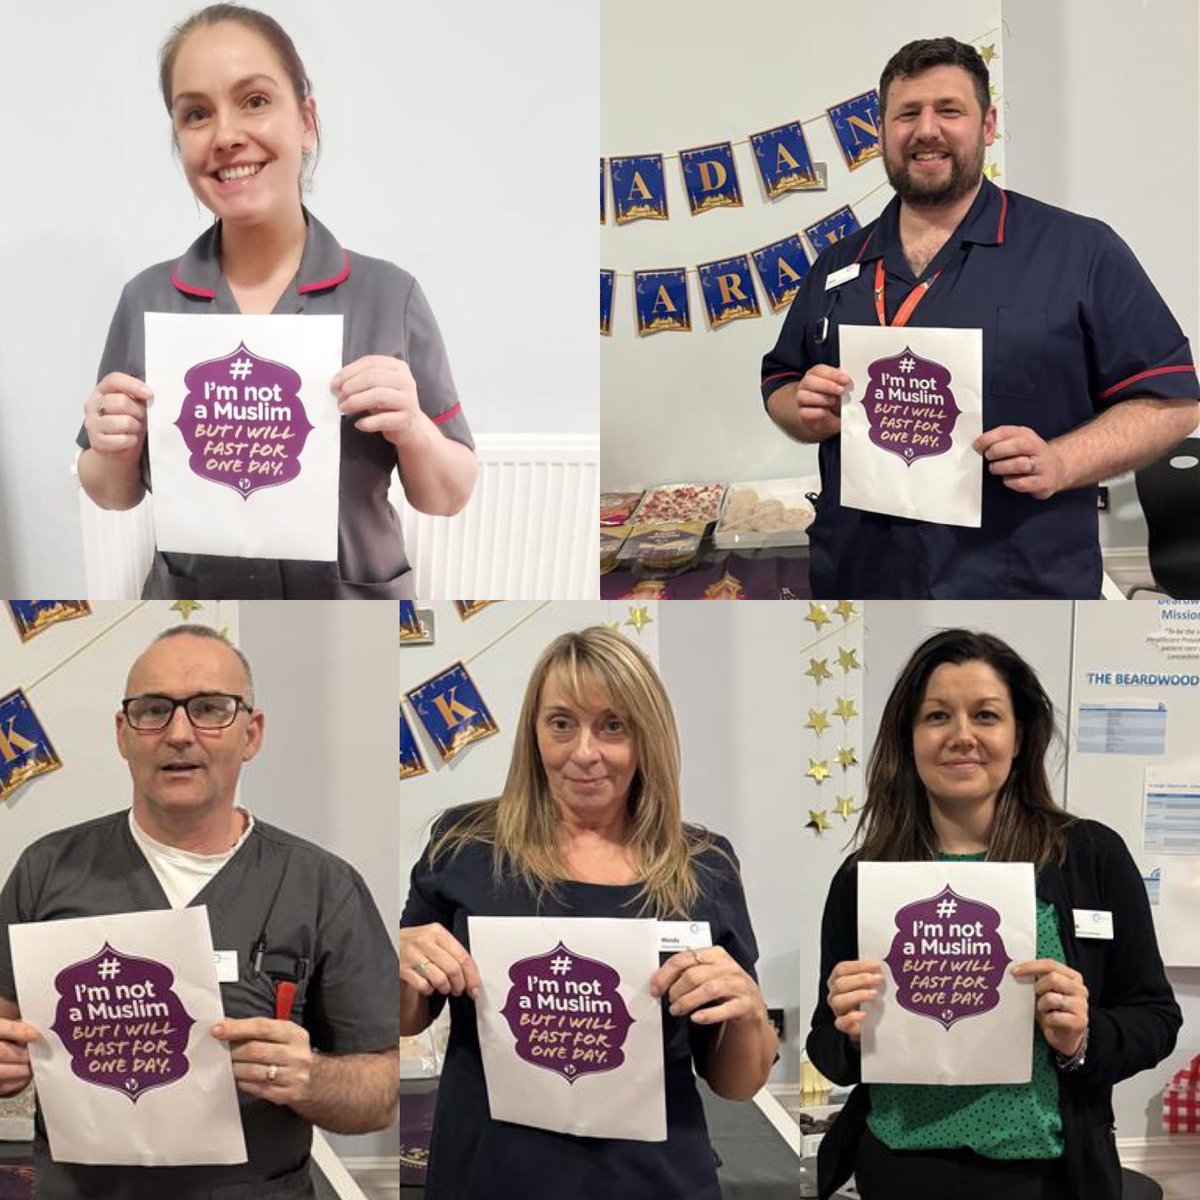 A group of non-Muslim members of staff at The Beardwood Hospital took part in our #imnotamuslimbutiwillfastforoneday campaign. “We took part to understand the beliefs and values of the Islamic faith, and to share the experience with our friends and colleagues.”
#Ramadan